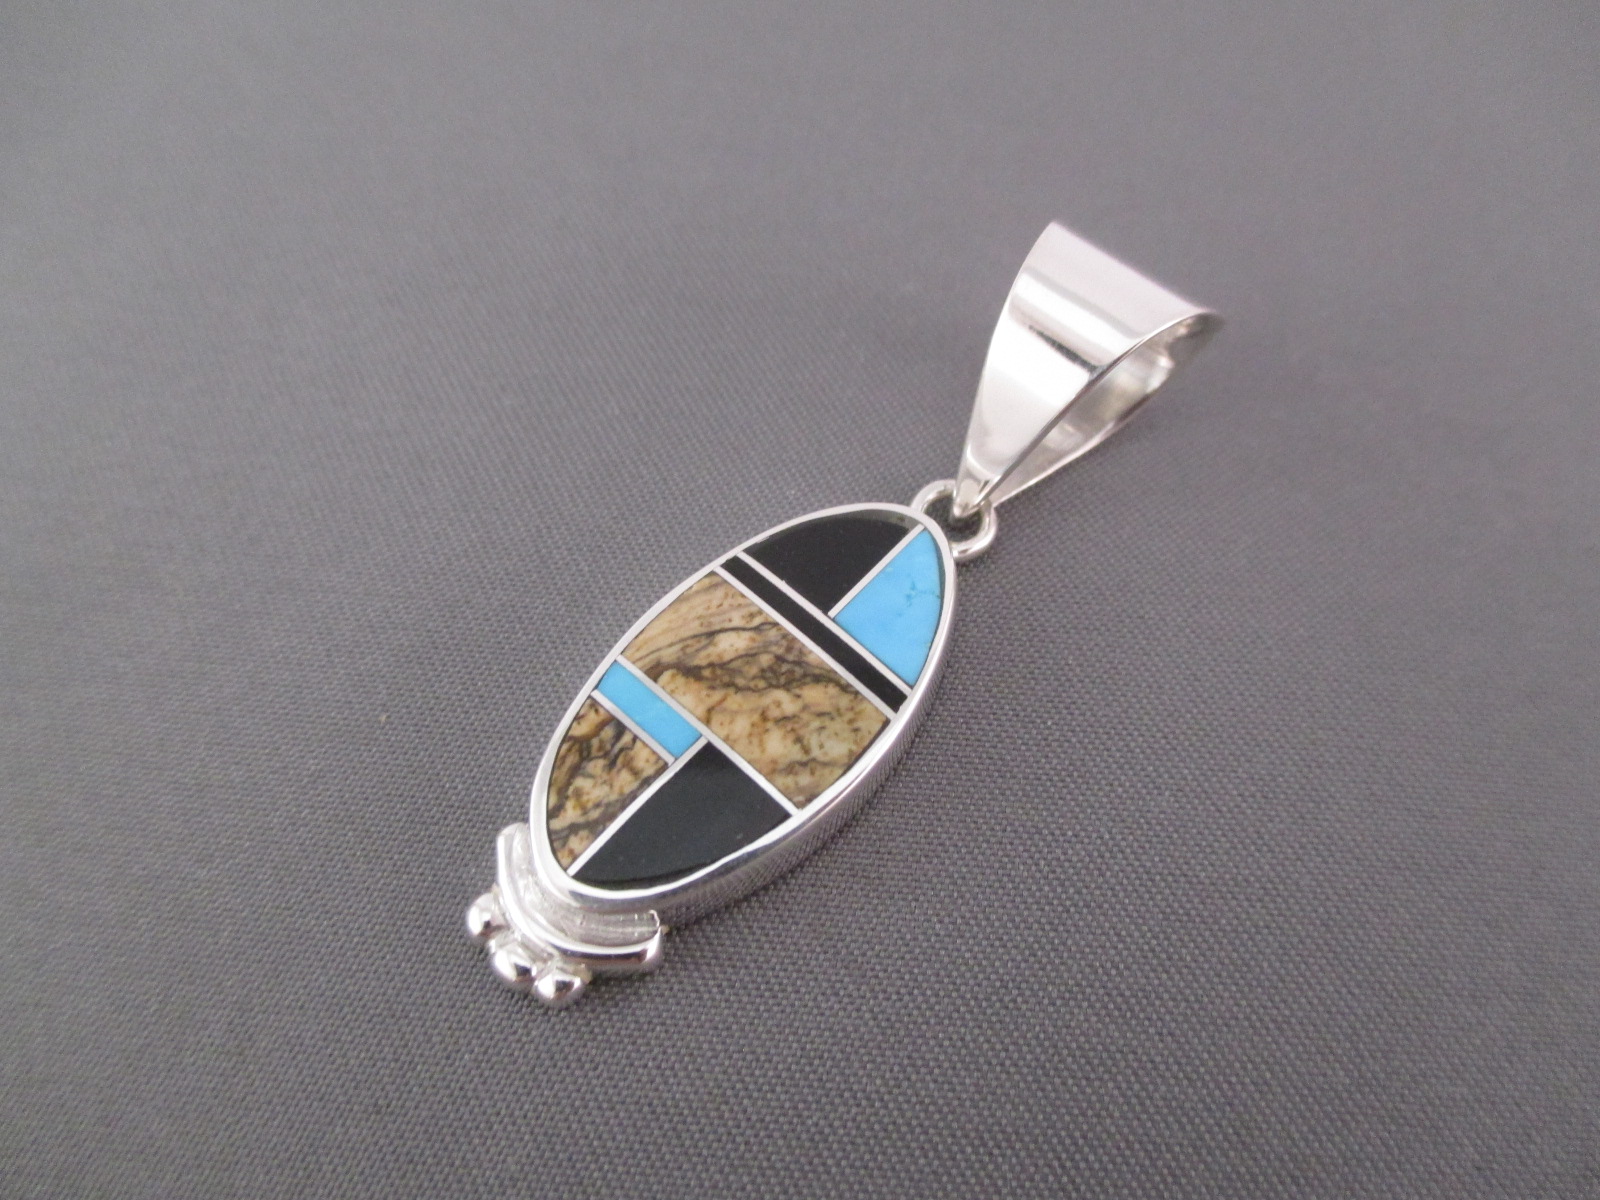 Inlay Pendant - Multi-Stone Inlay Pendant with Turquoise by Native American jewelry artist, Tim Charlie $140-